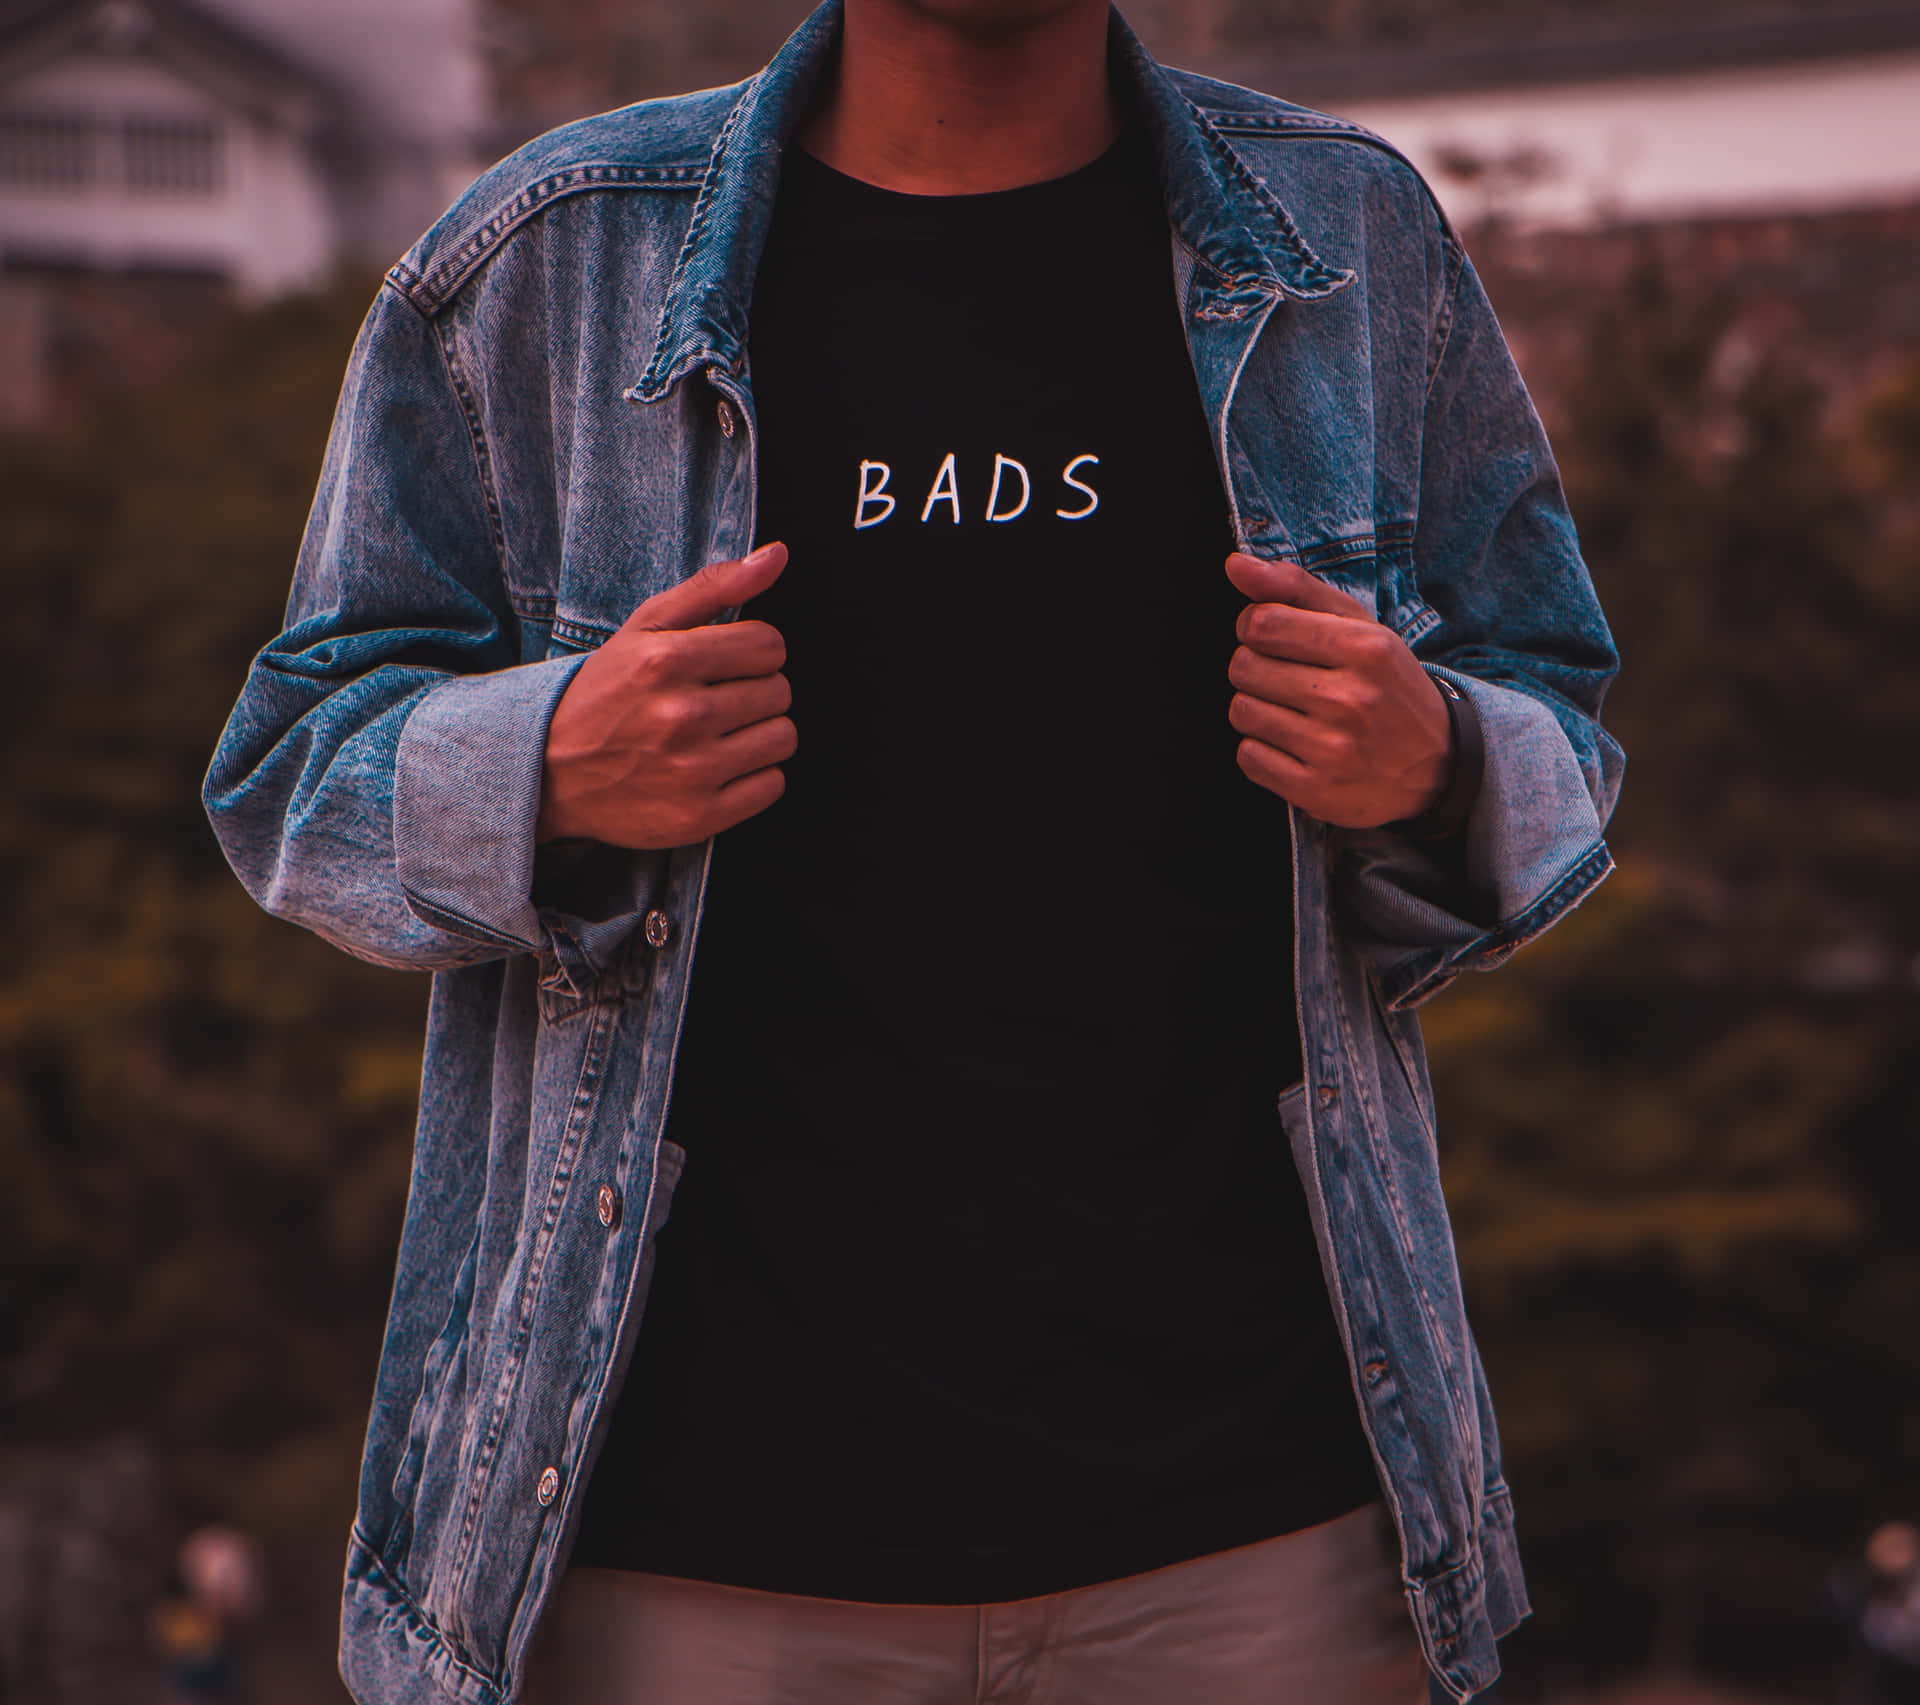 A Man Wearing A T - Shirt With The Word Bads On It